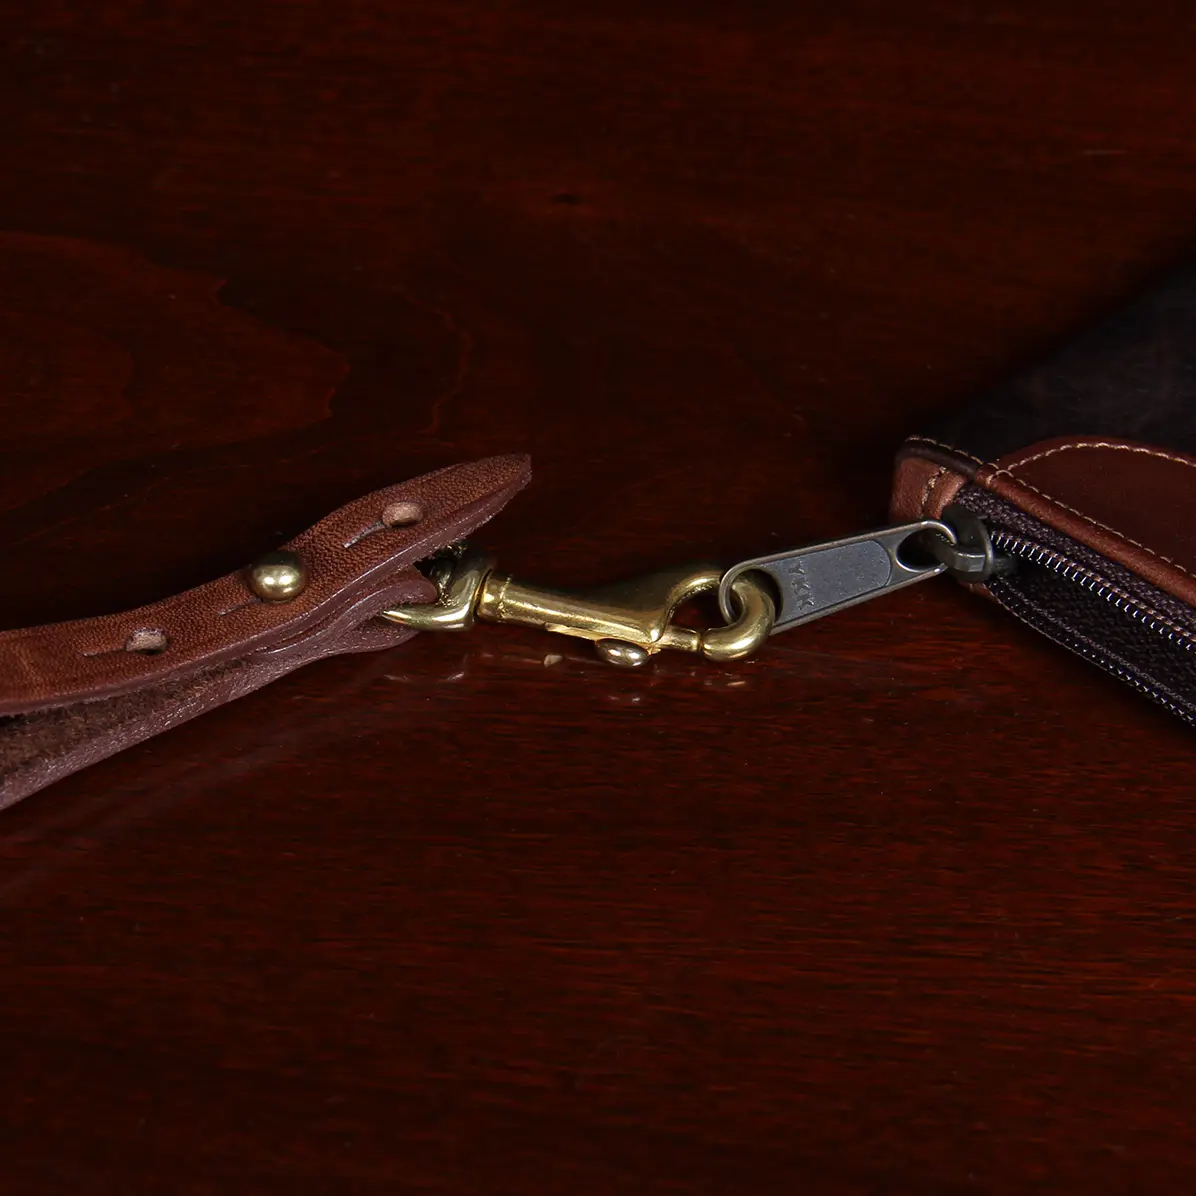 closeup view of clasp and zipper of brown leather wristlet clutch on black background and wood table